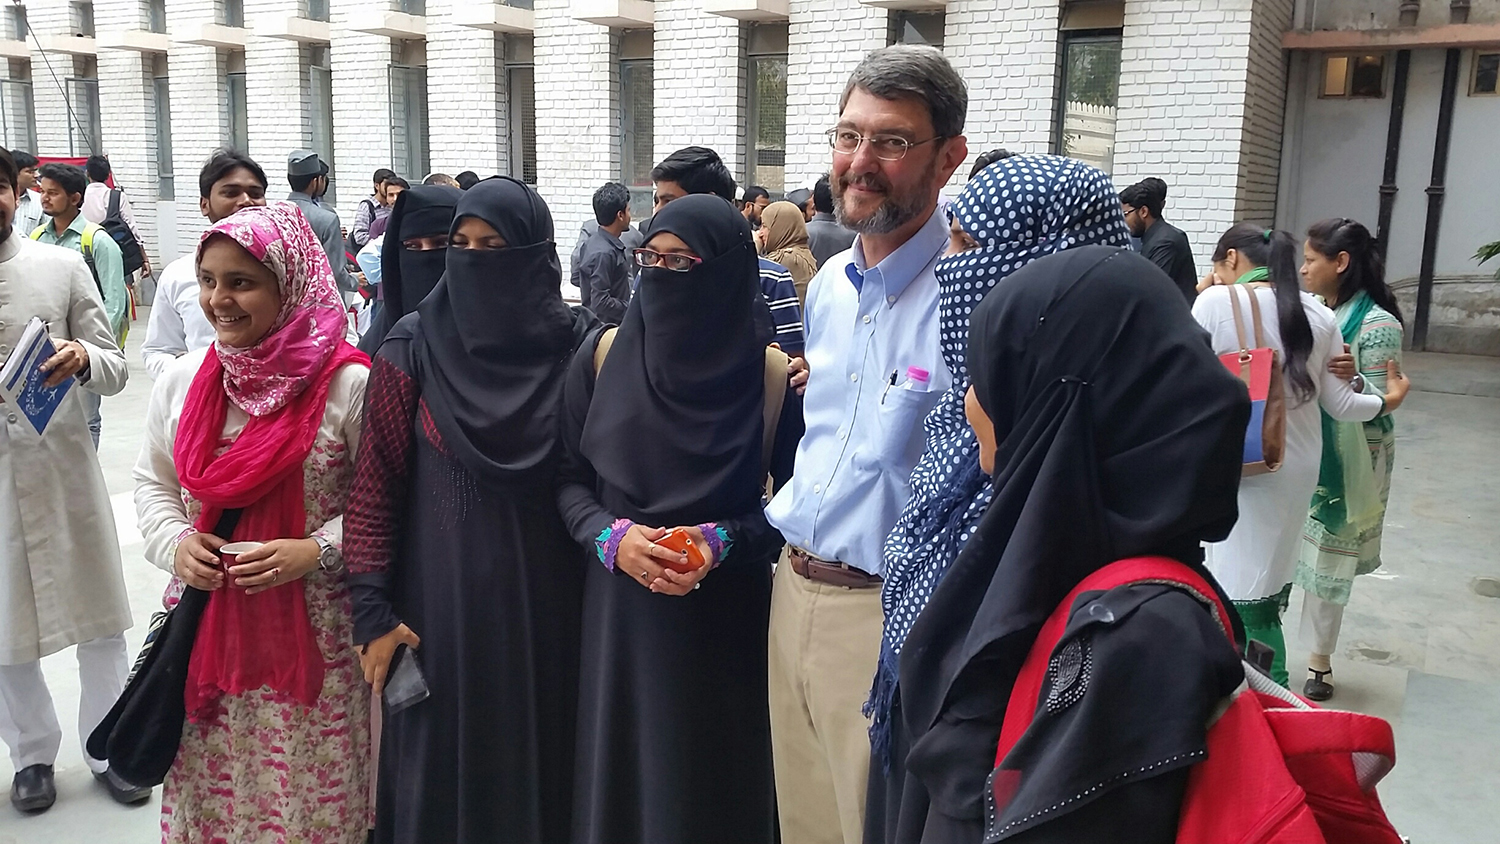 Loyd Allen with Muslim women in India. Allen taught at a Muslim university there earlier this year as part of a scholar exchange program. (Photo courtesy of Loyd Allen)